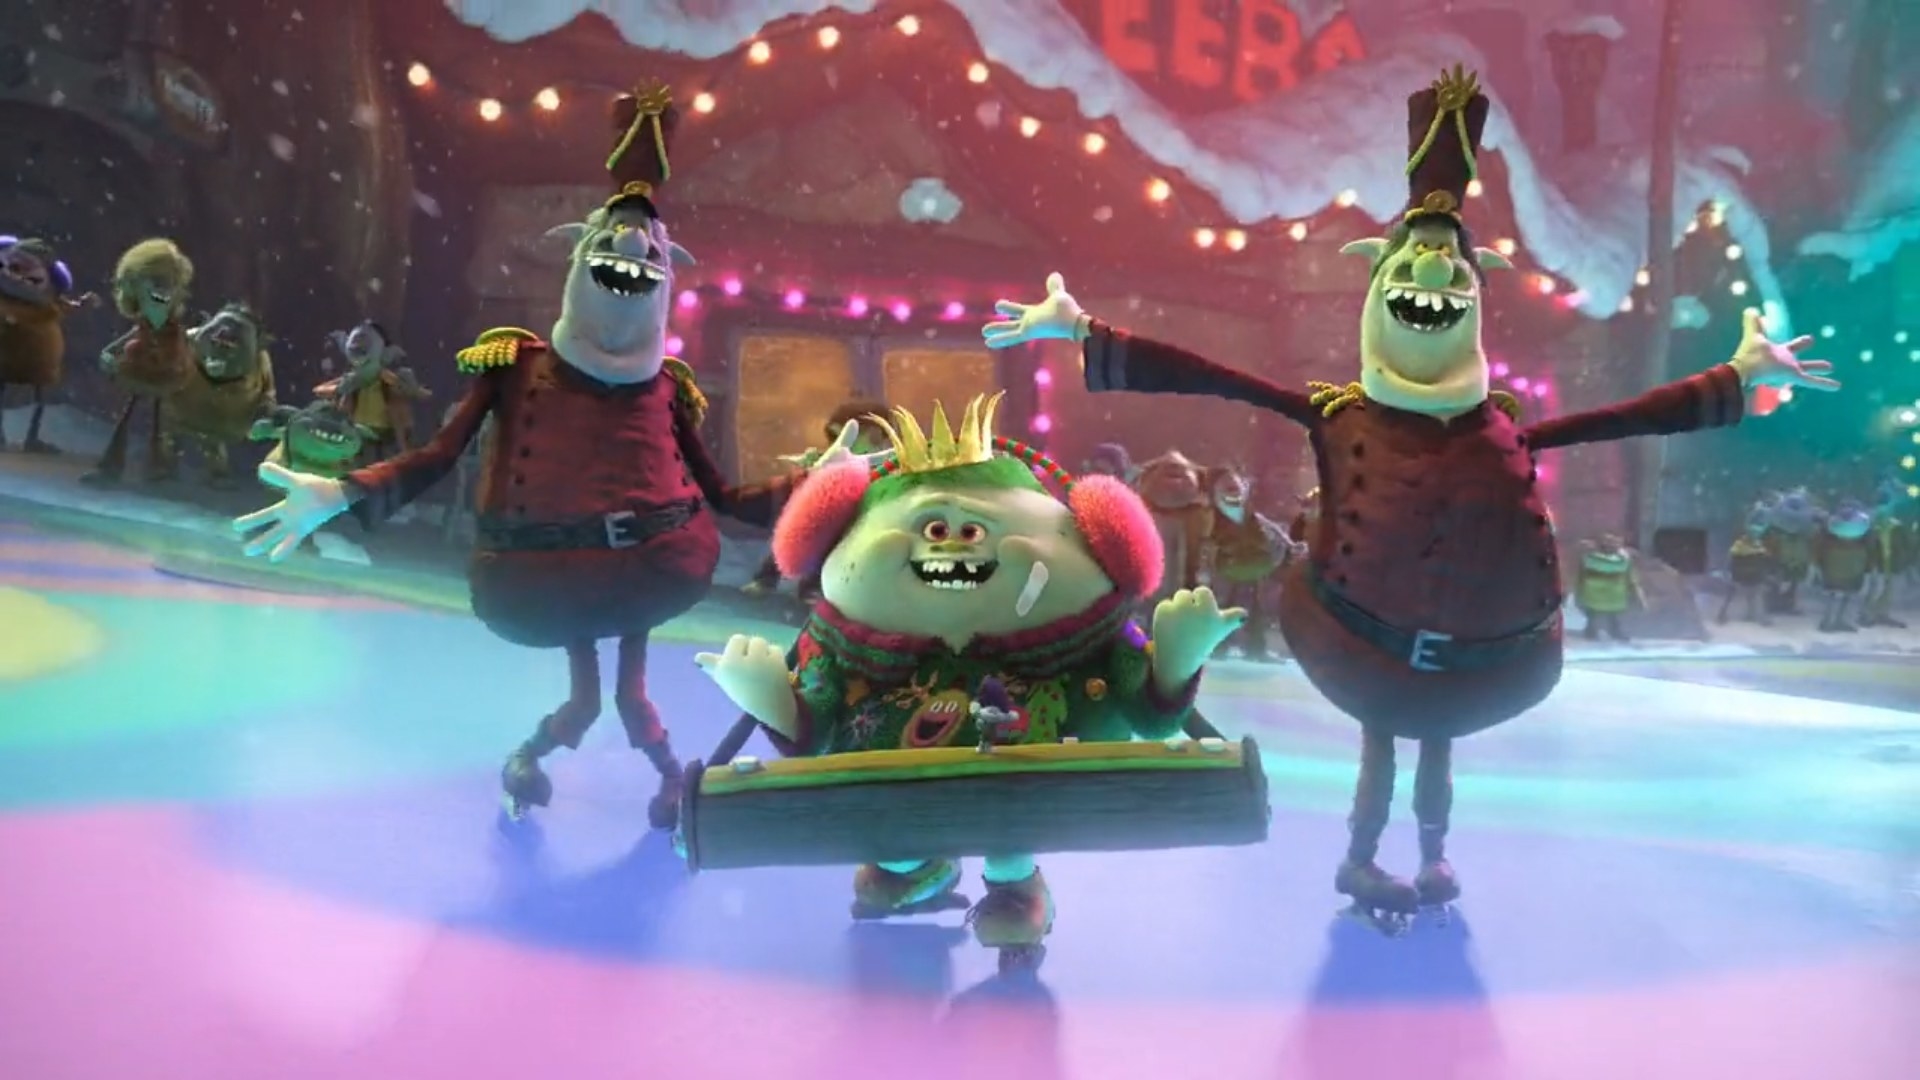 Scene from the Trolls Holiday movie